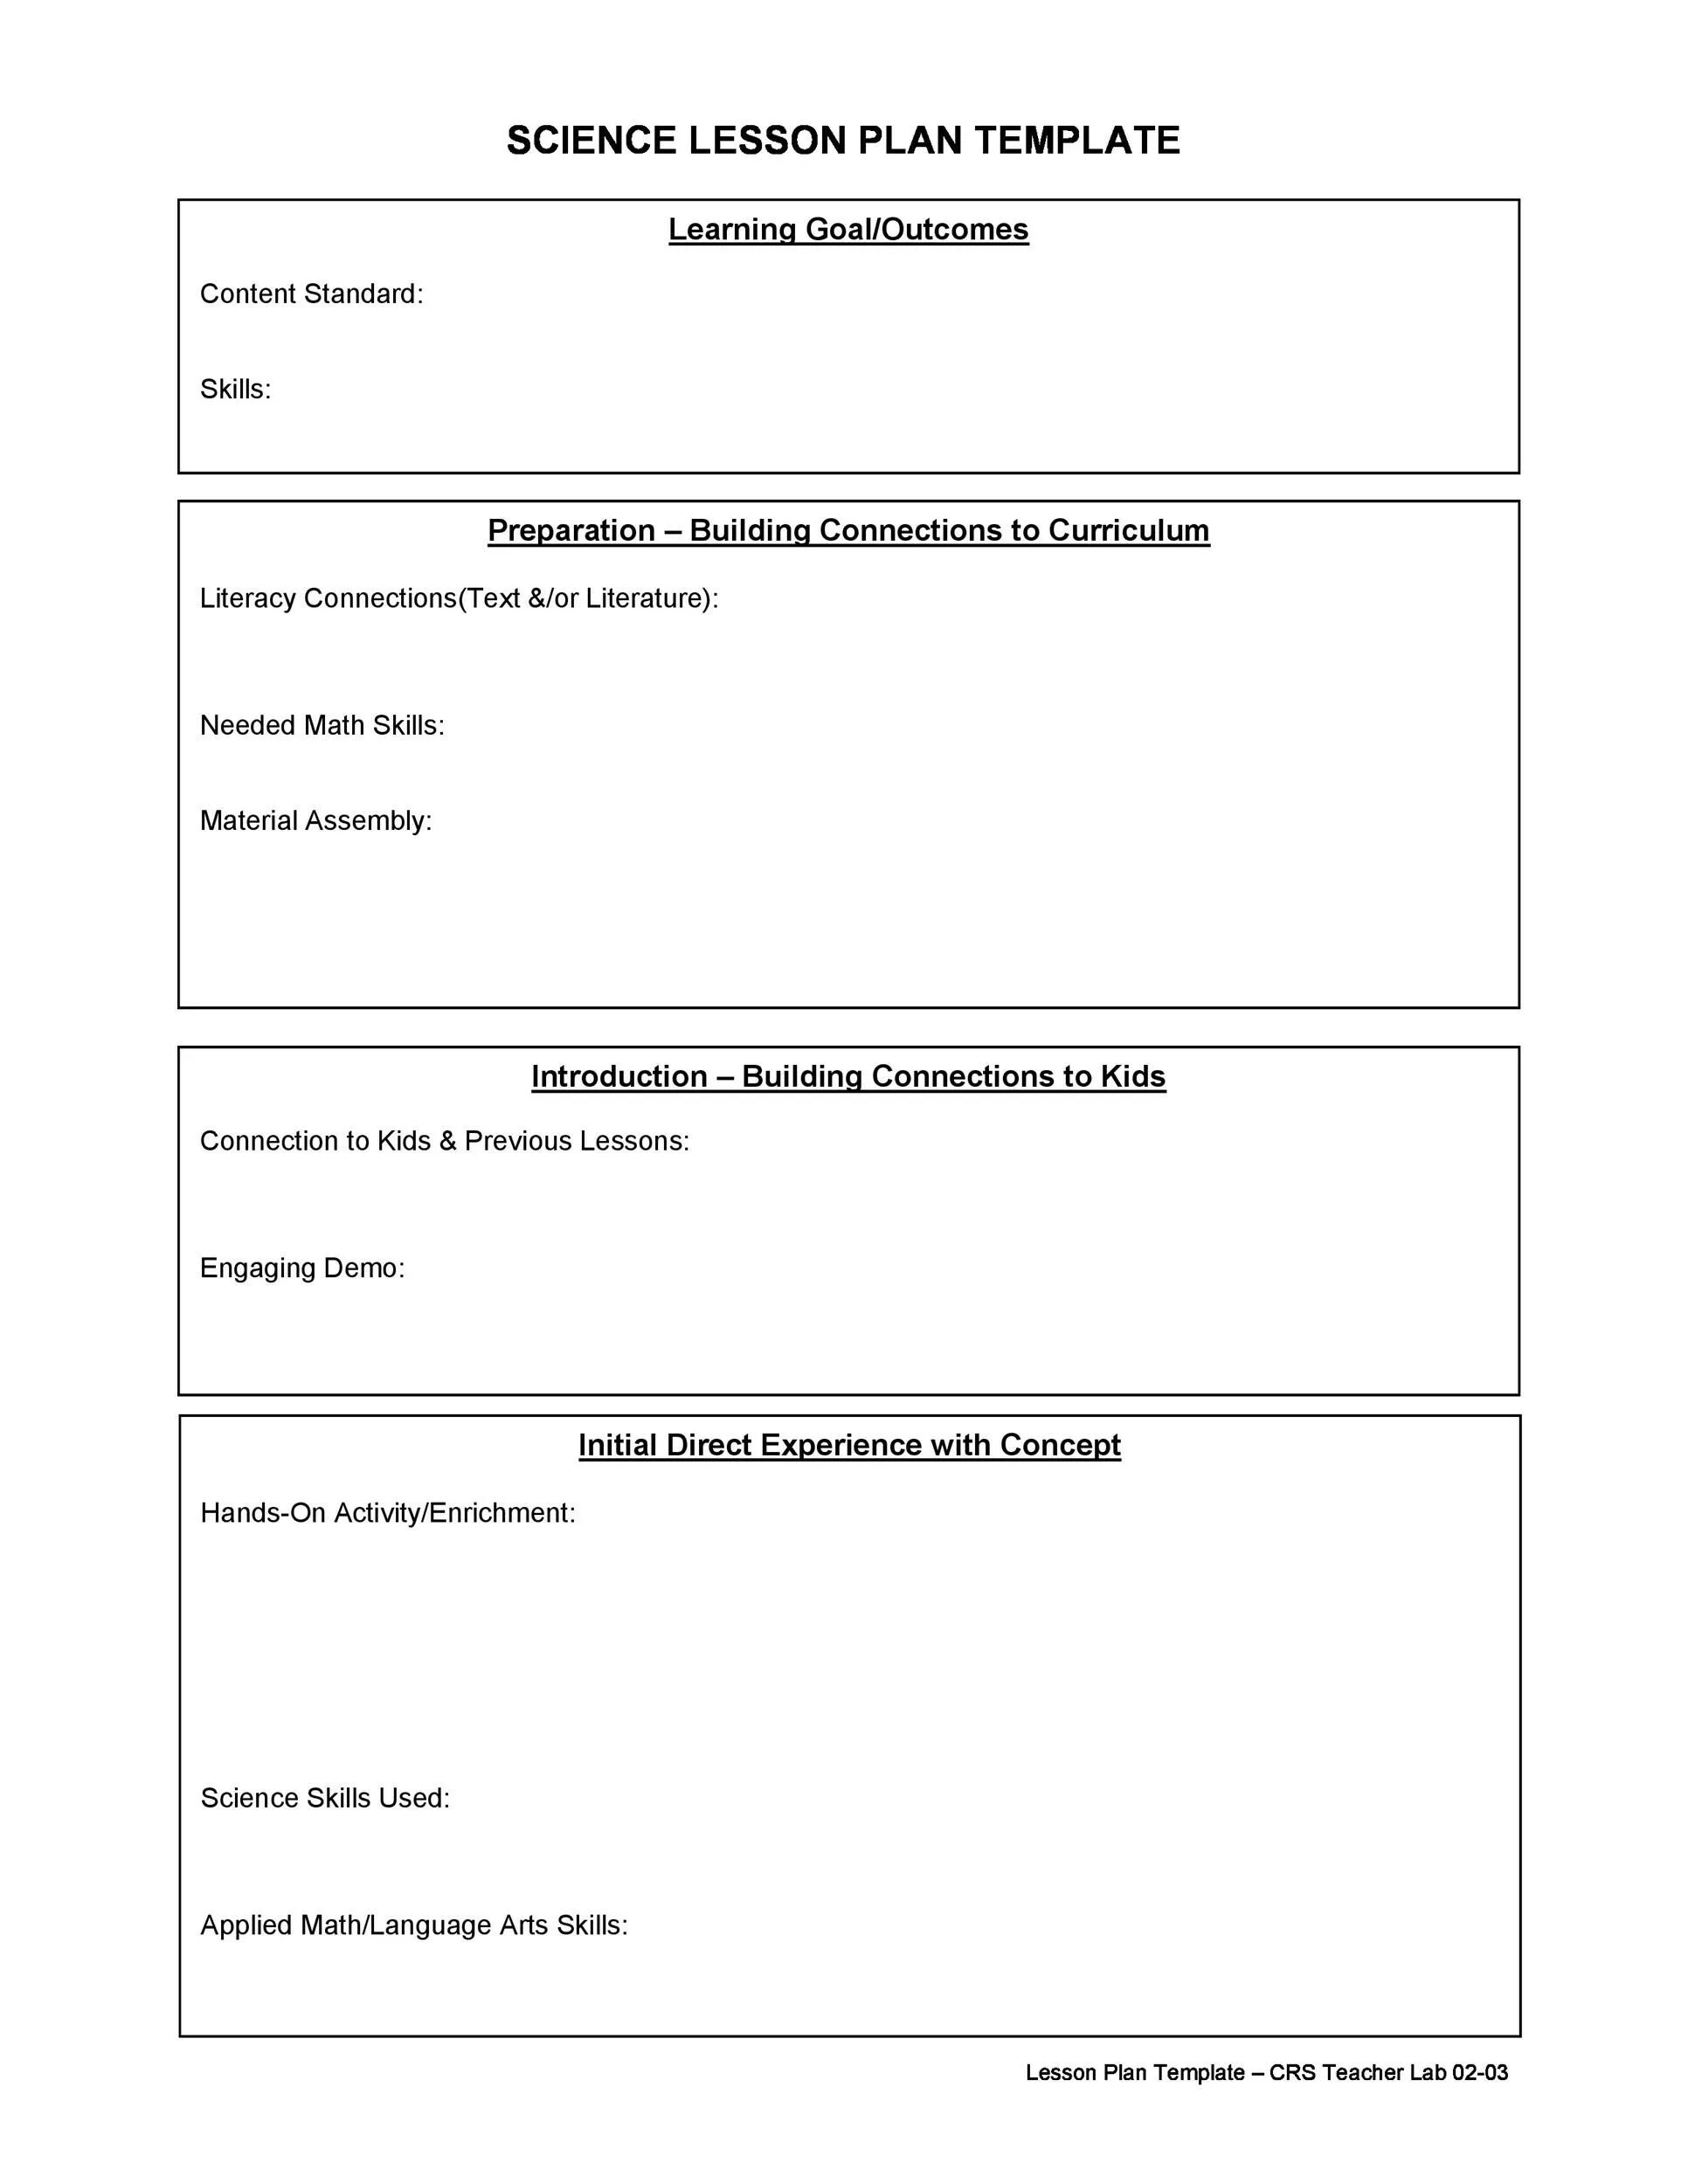 Lesson plans for kids. Lesson Plan Template. Lesson Plan шаблон. Templates for Lesson Plan. Lesson Plan Template example.